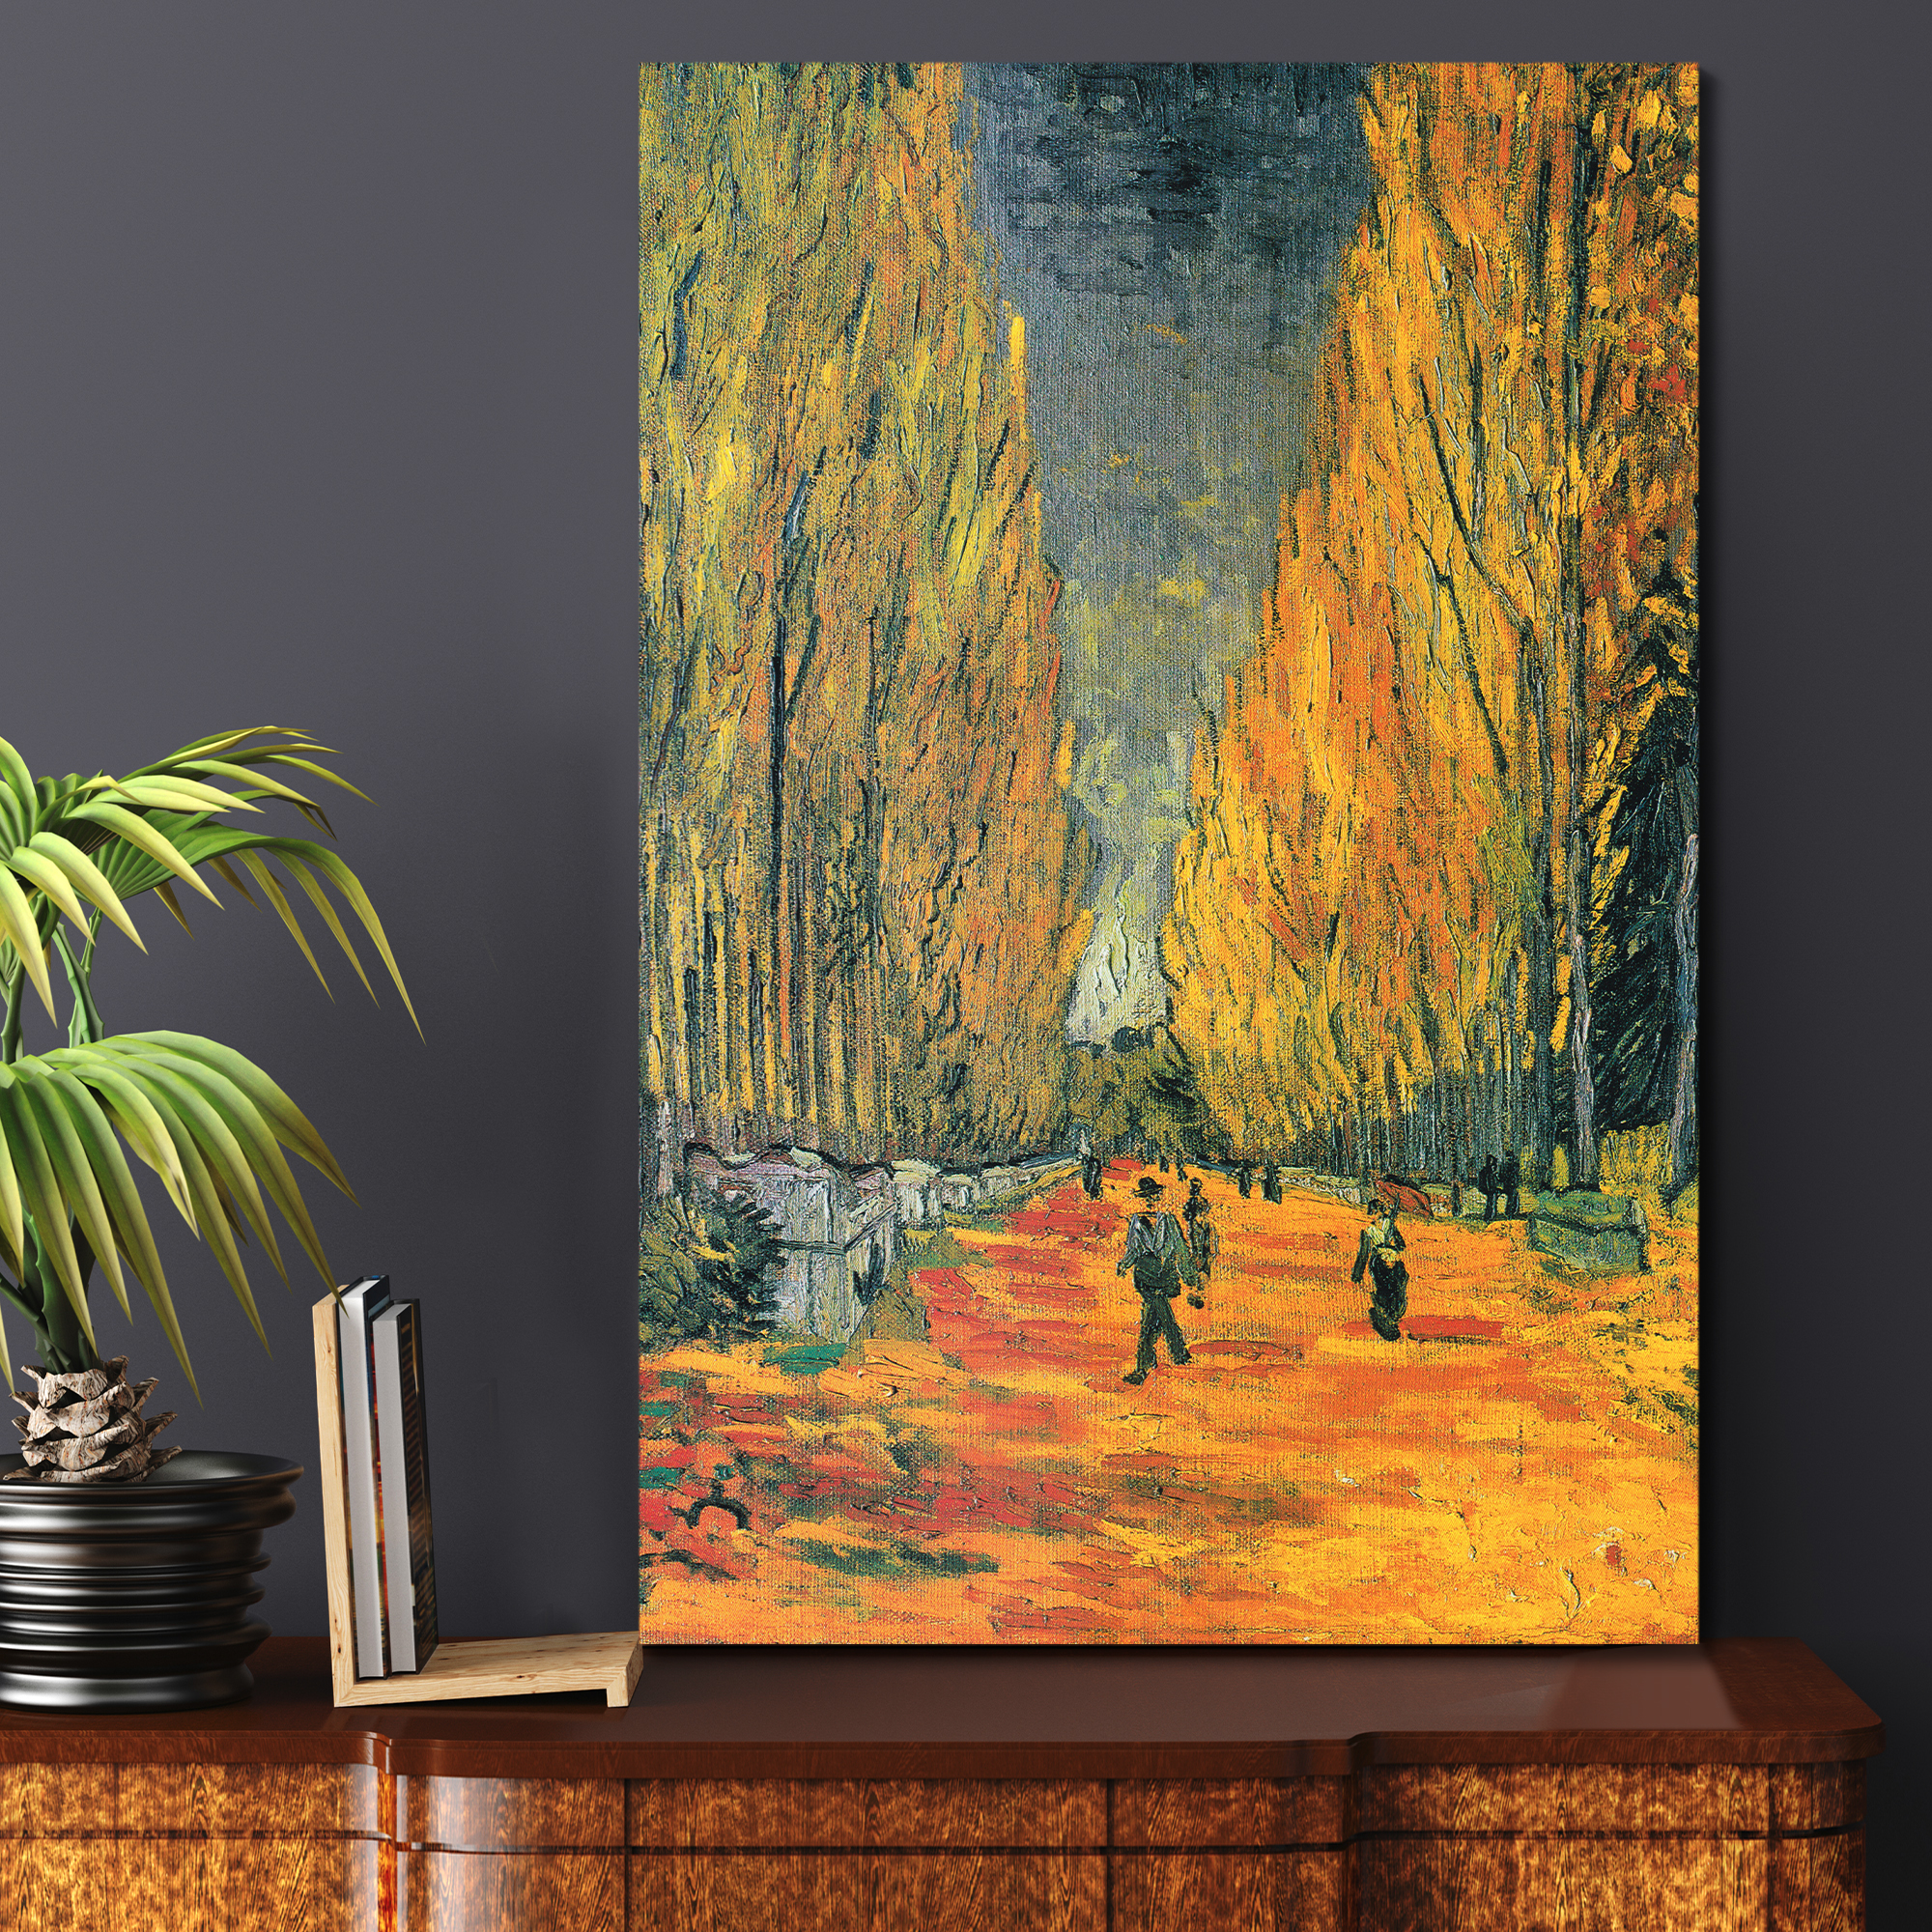 Les Alyscamps by Vincent Van Gogh - Oil Painting Reproduction on Canvas Prints Wall Art, Ready to Hang - 32